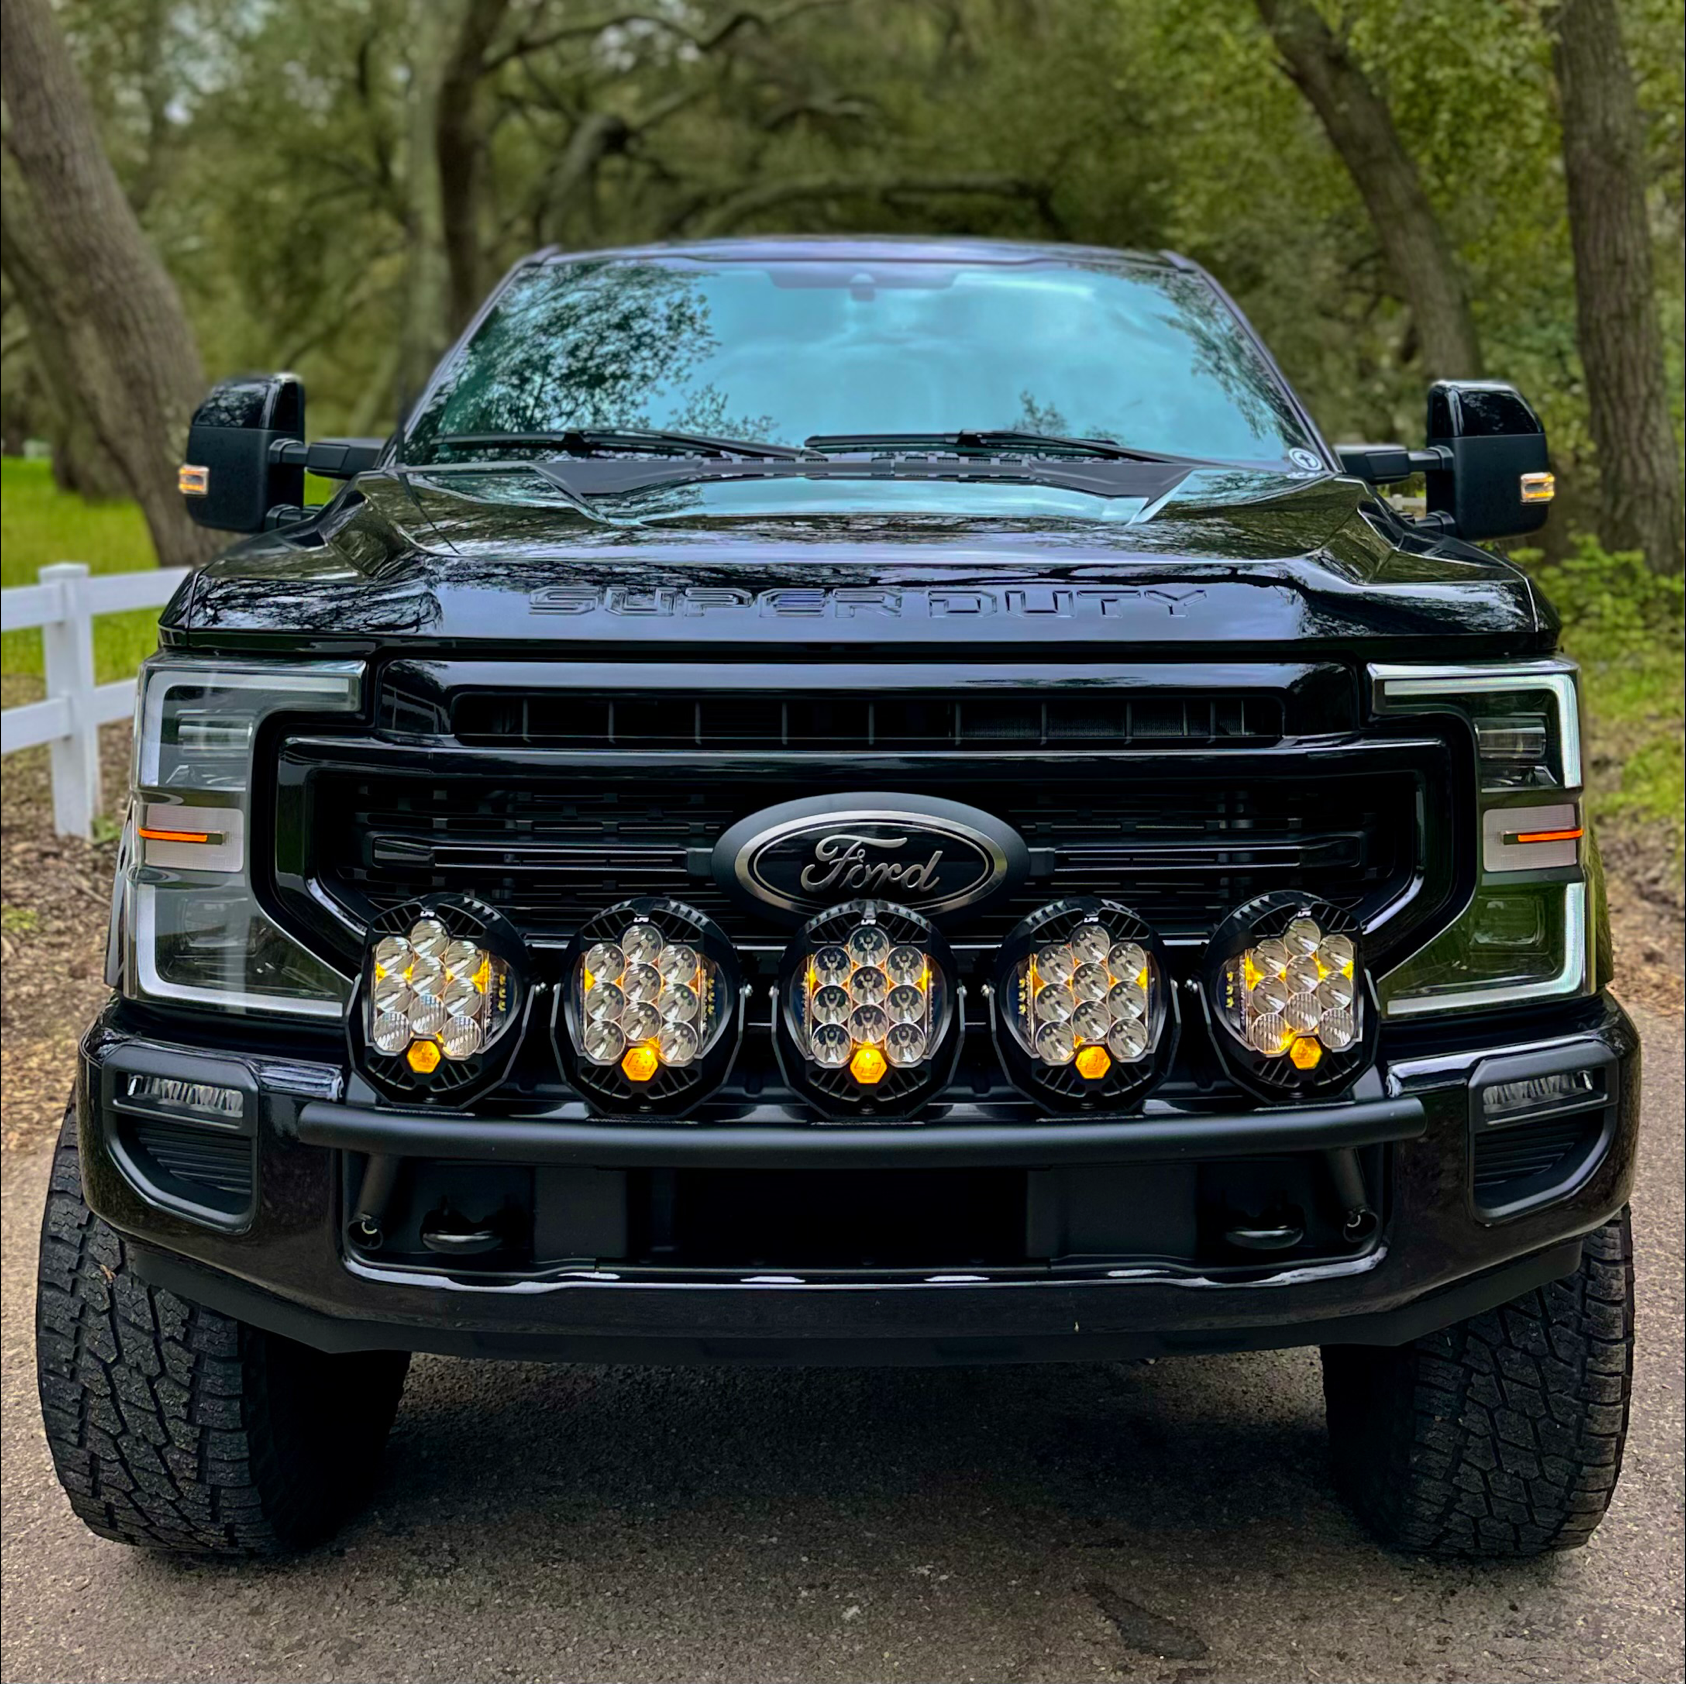 2017 - 2023 Ford Super Duty Light Mount - The Classic Trophy Truck Style  featuring 5 Round Off-Road Light Tabs